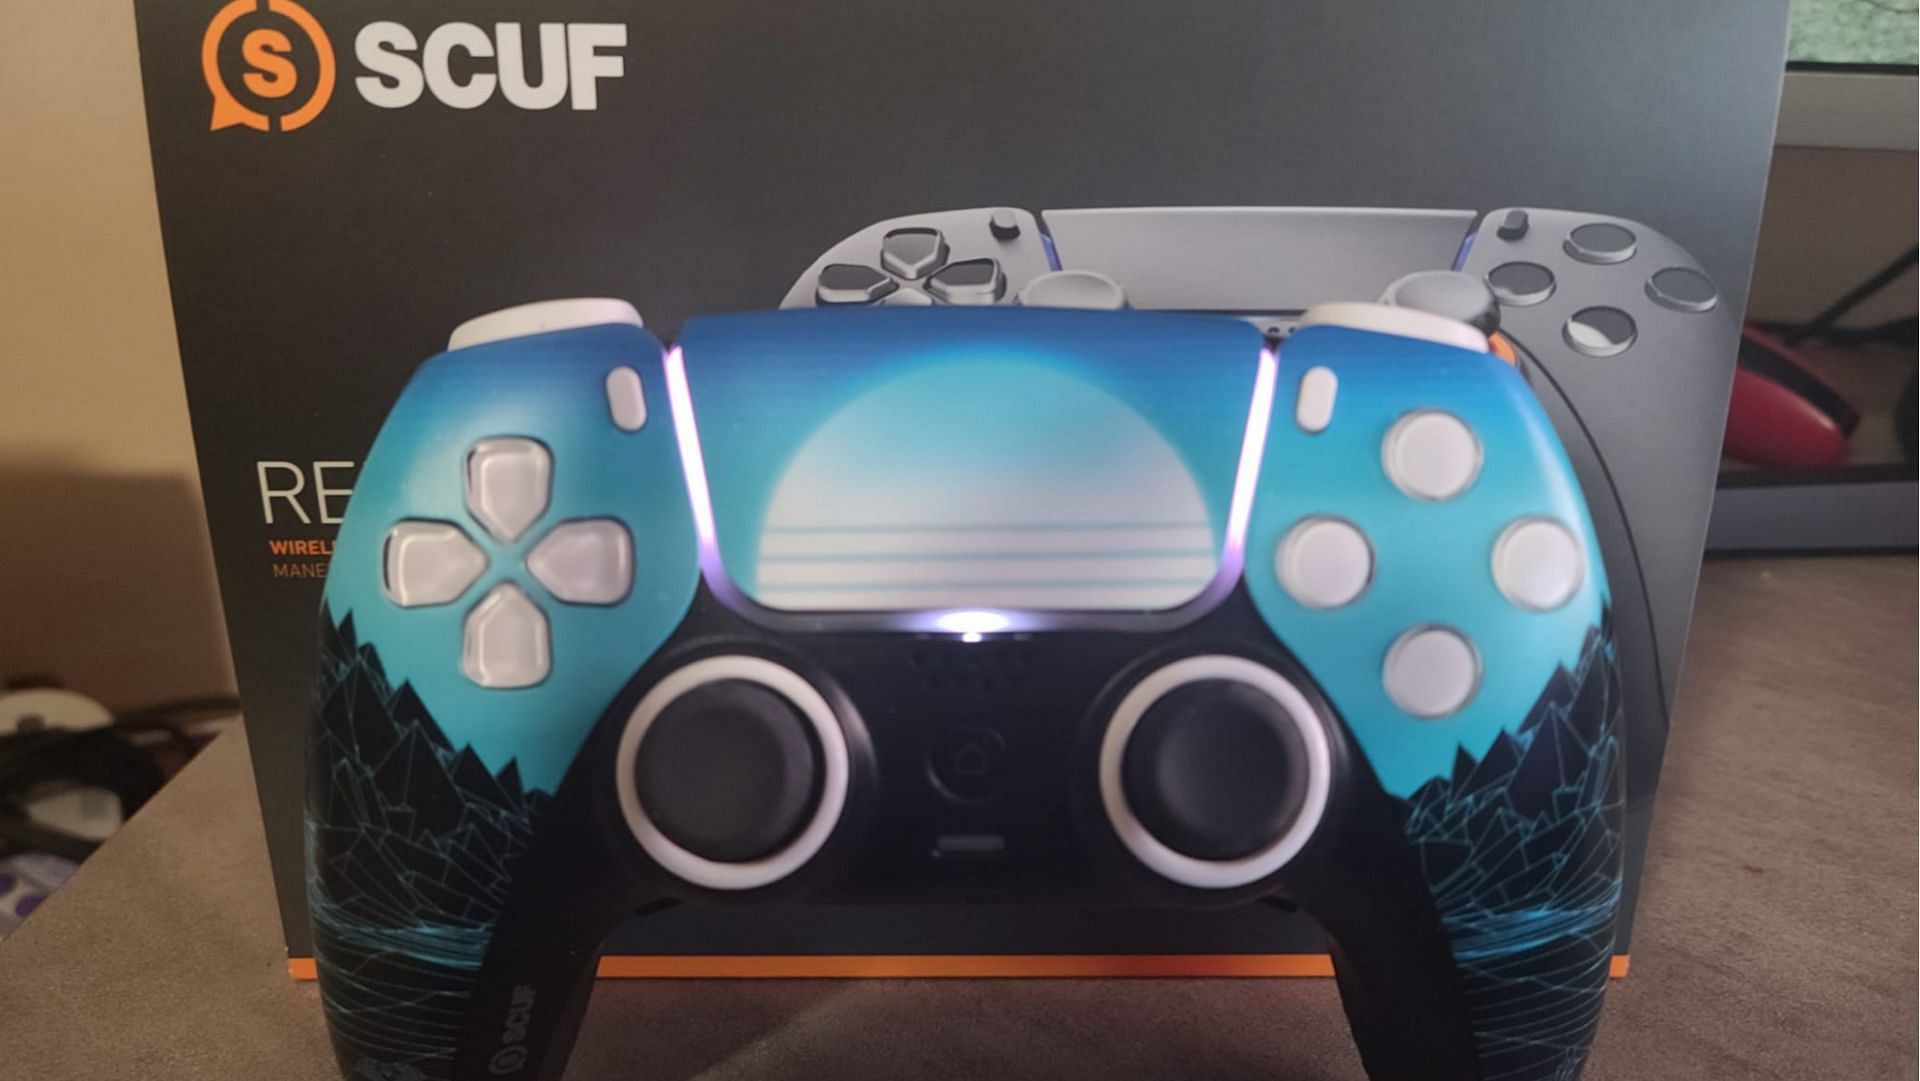 SCUF Reflex is an amazing controller, and IceManIsaac